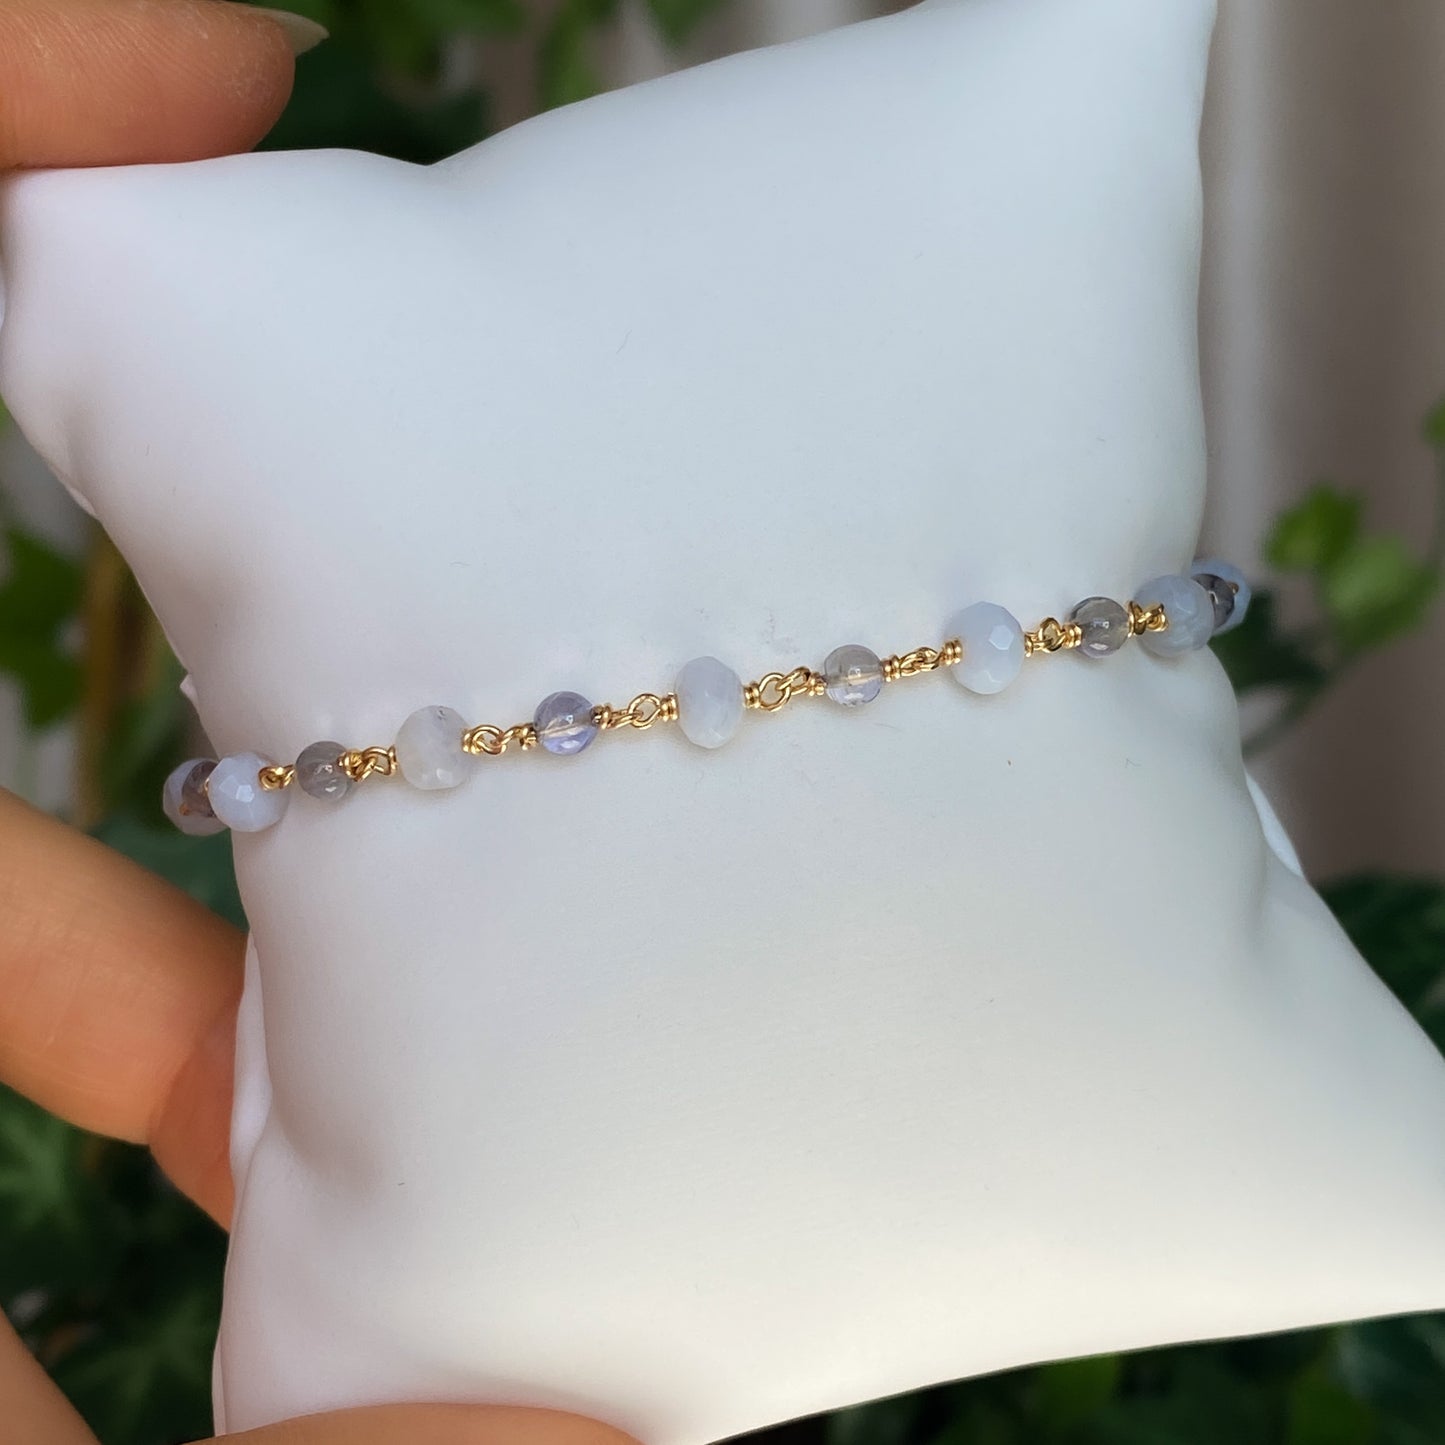 Cosette ~ Blue Lace Agate, Iolite, and 14k Gold Filled Bracelet